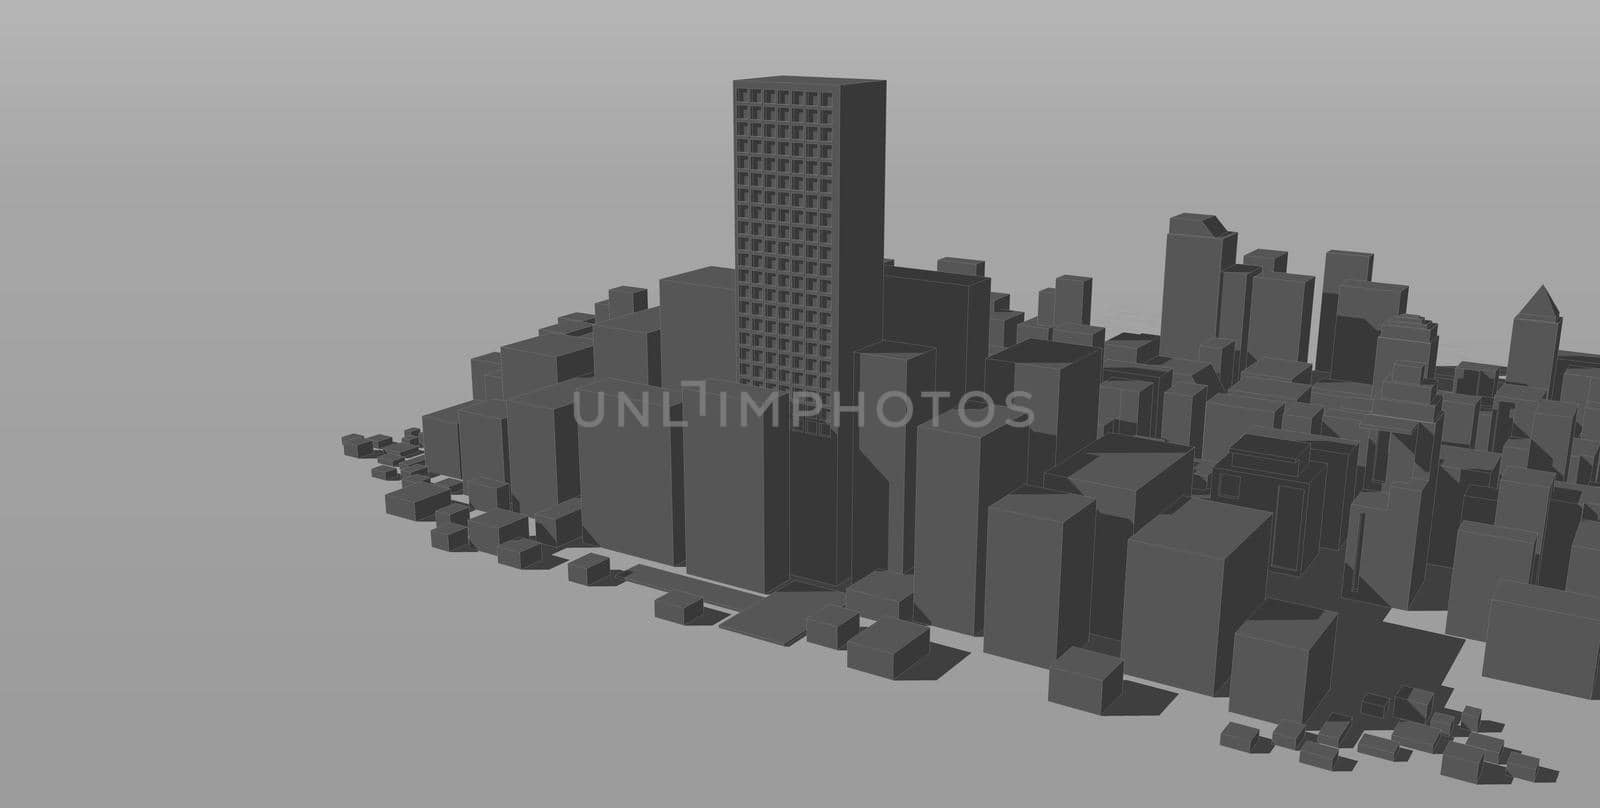 Cityscape, Building perspective, Modern building in the city skyline